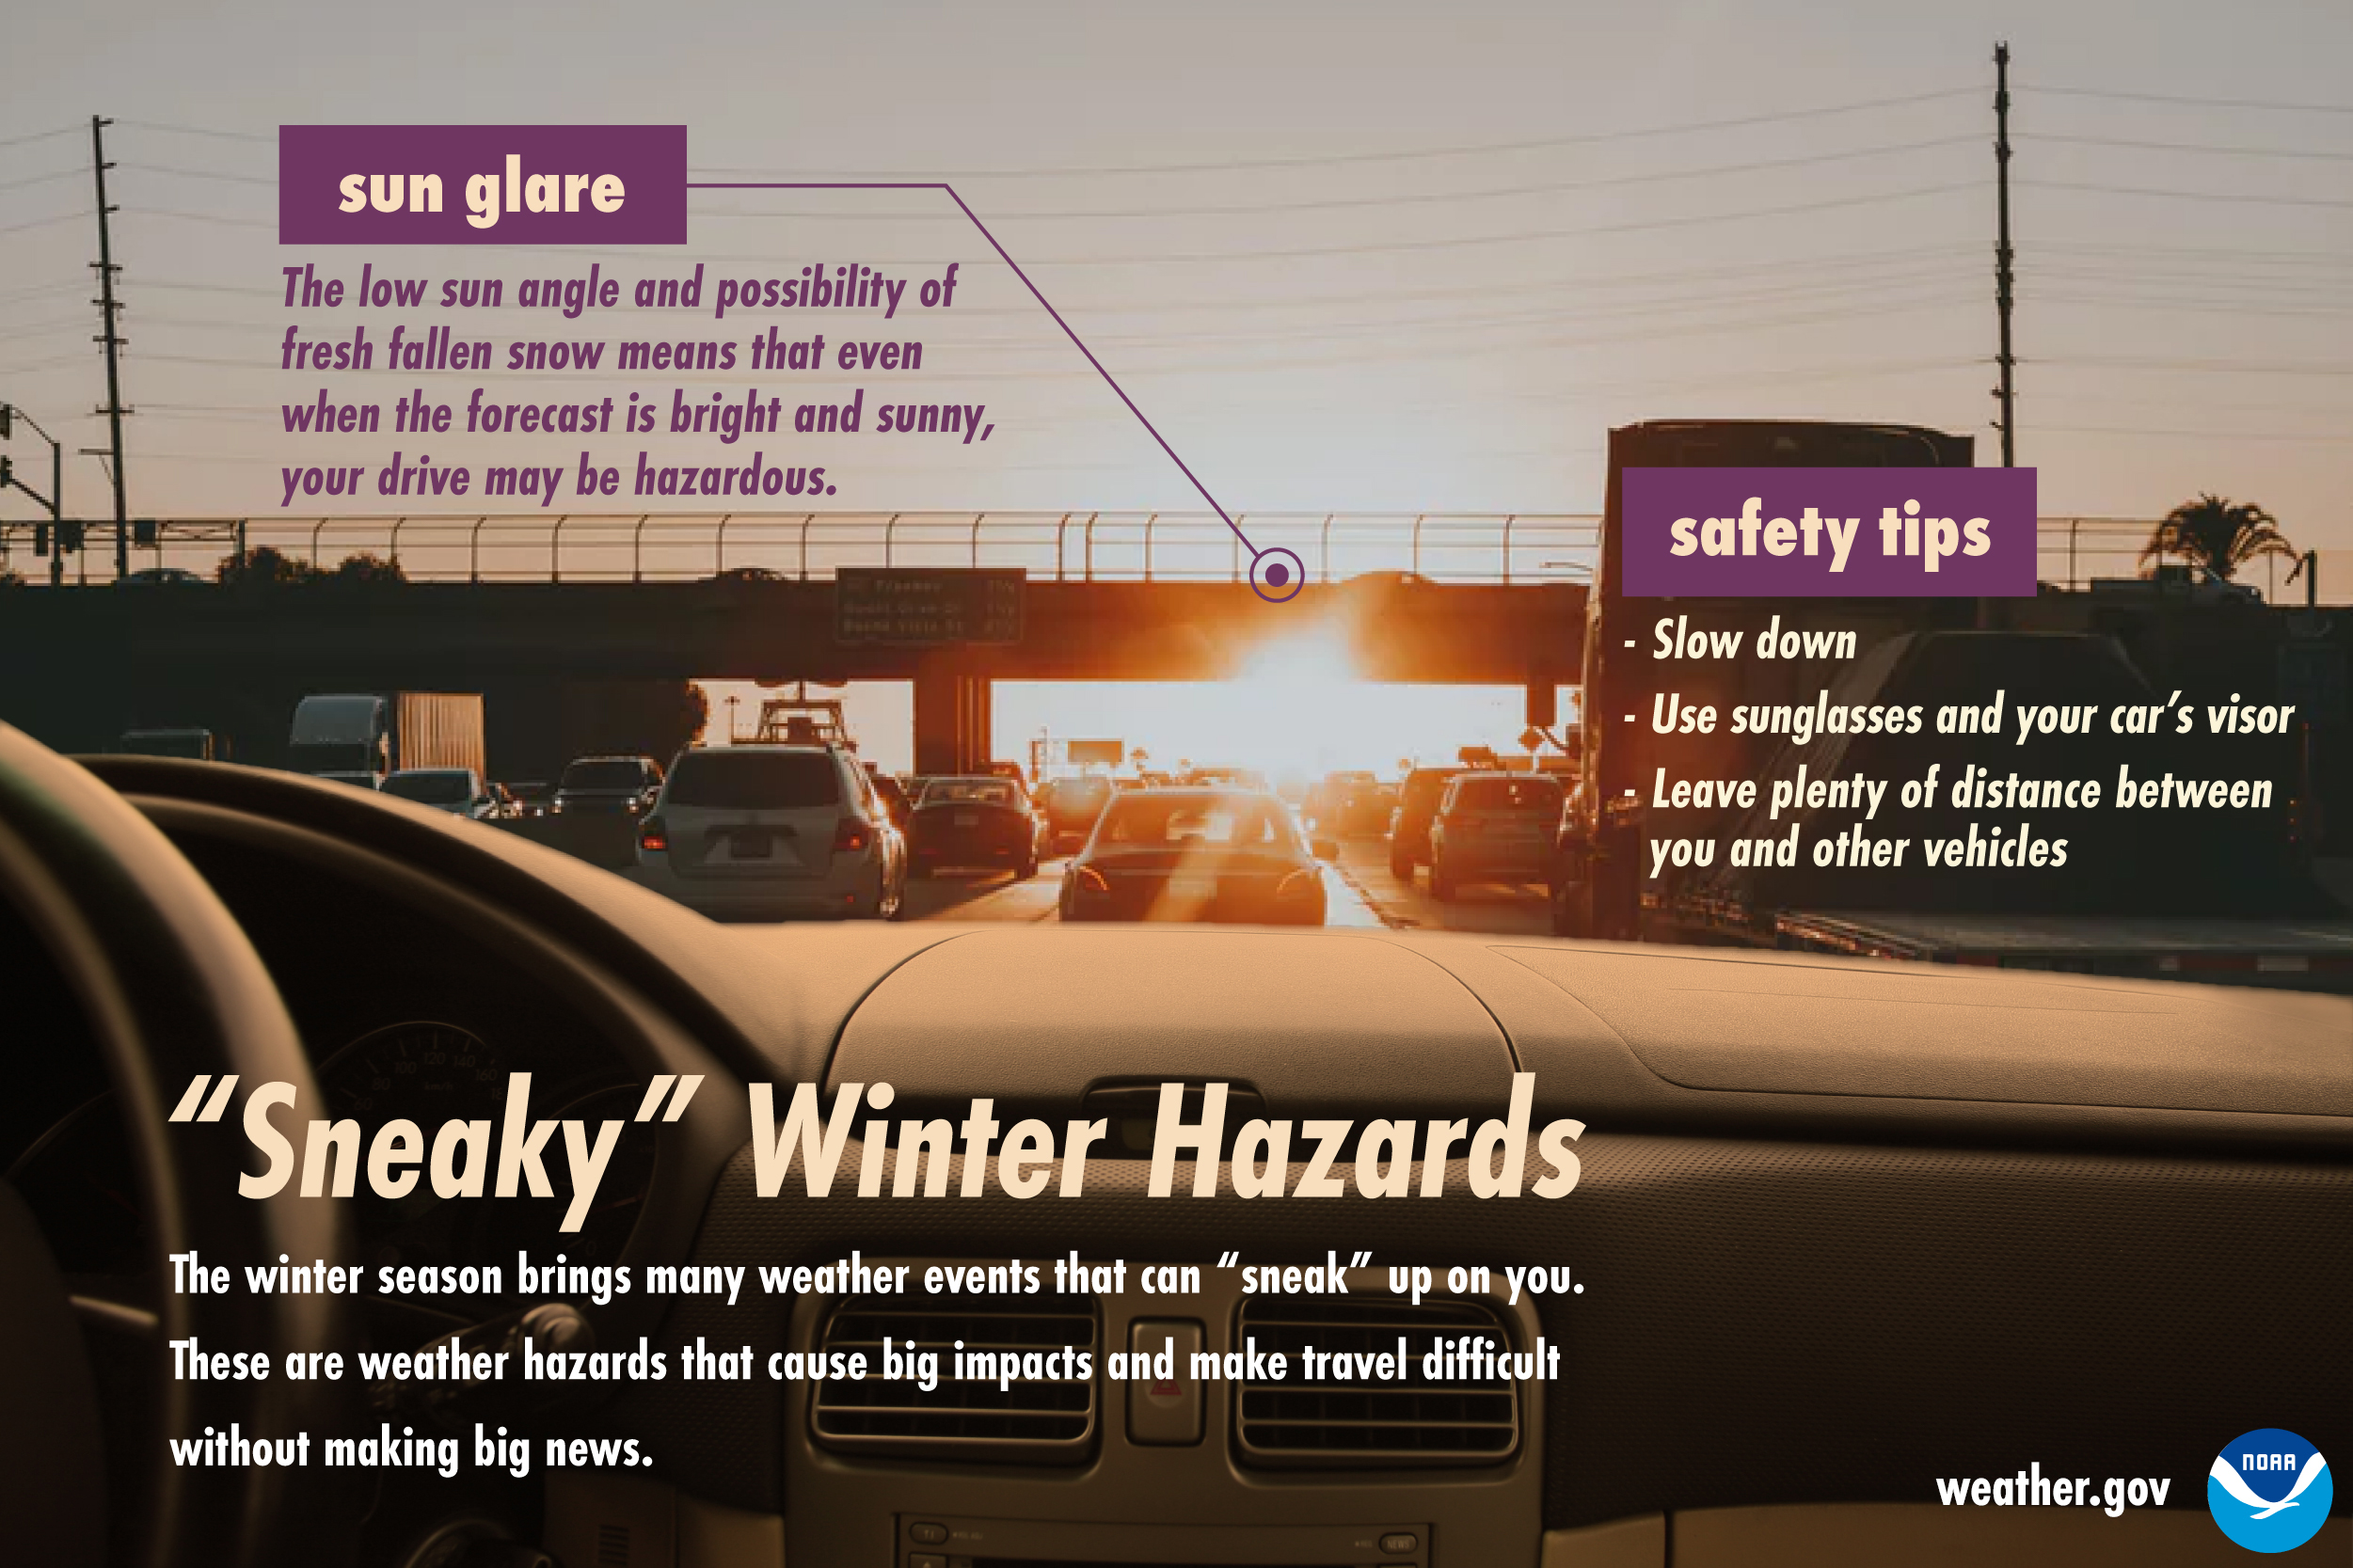 Sneaky Winter Hazards: Sun glare. The low sun angle and possibility of fresh fallen snow means that even when the forecast is bright and sunny, your drive may be hazardous. Safety tips: Slow down; use sunglasses and your car's visor; leave plenty of distance between you and other vehicles.